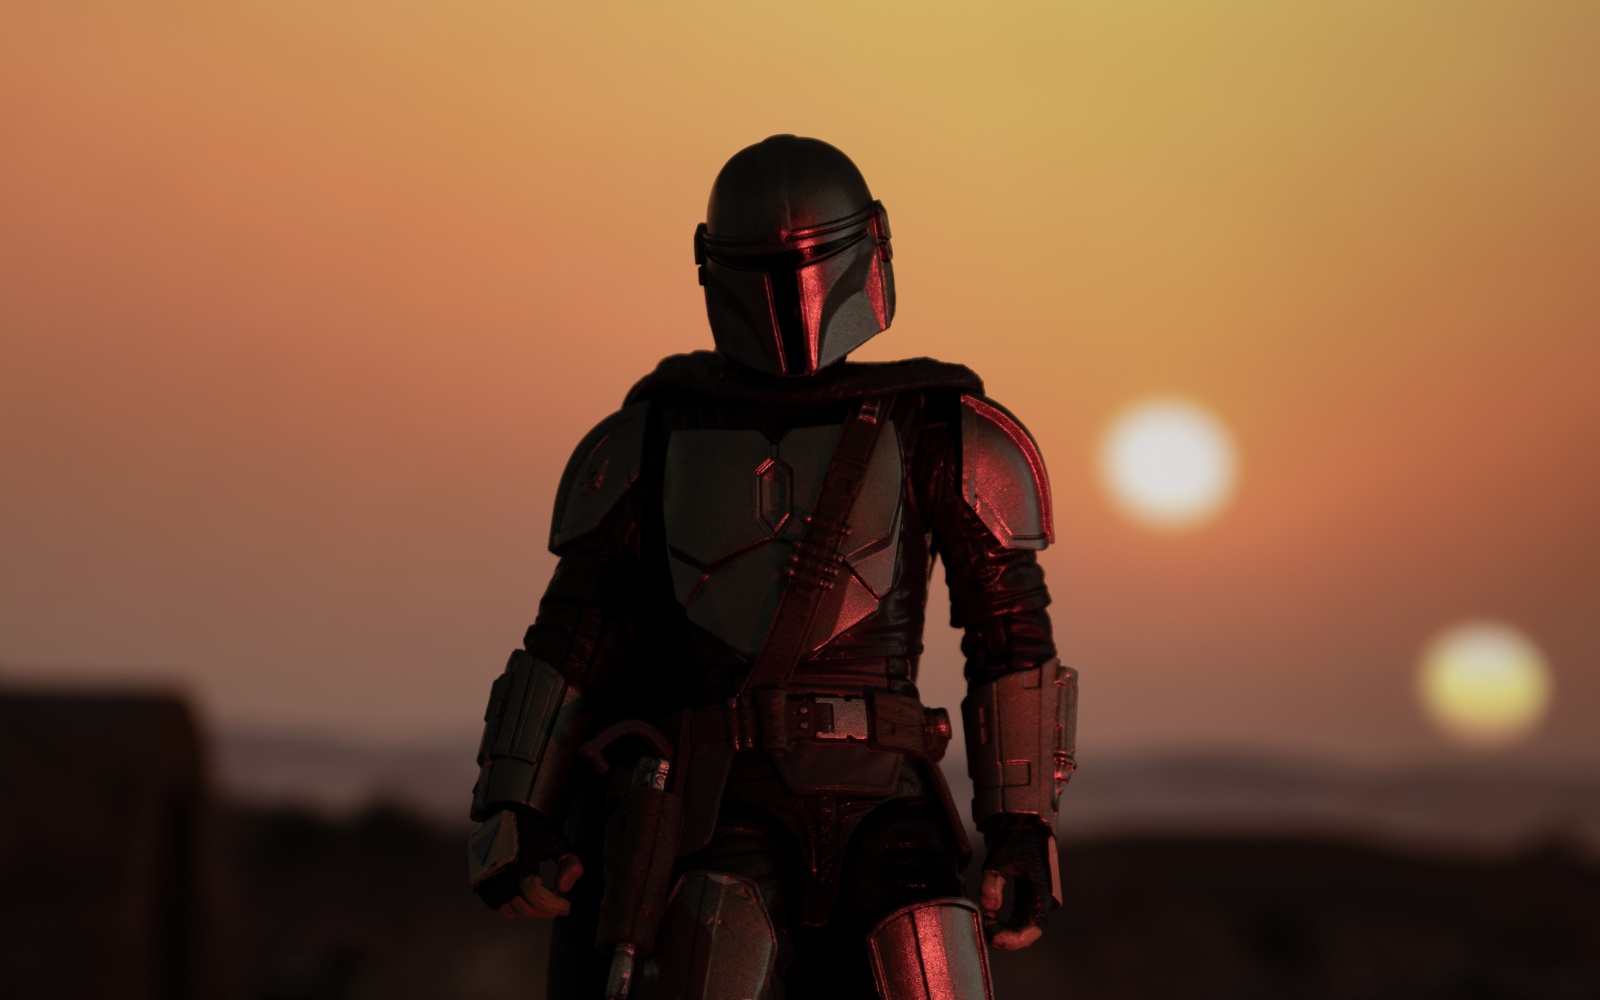 10 shows like The Mandalorian to watch now - The Manual